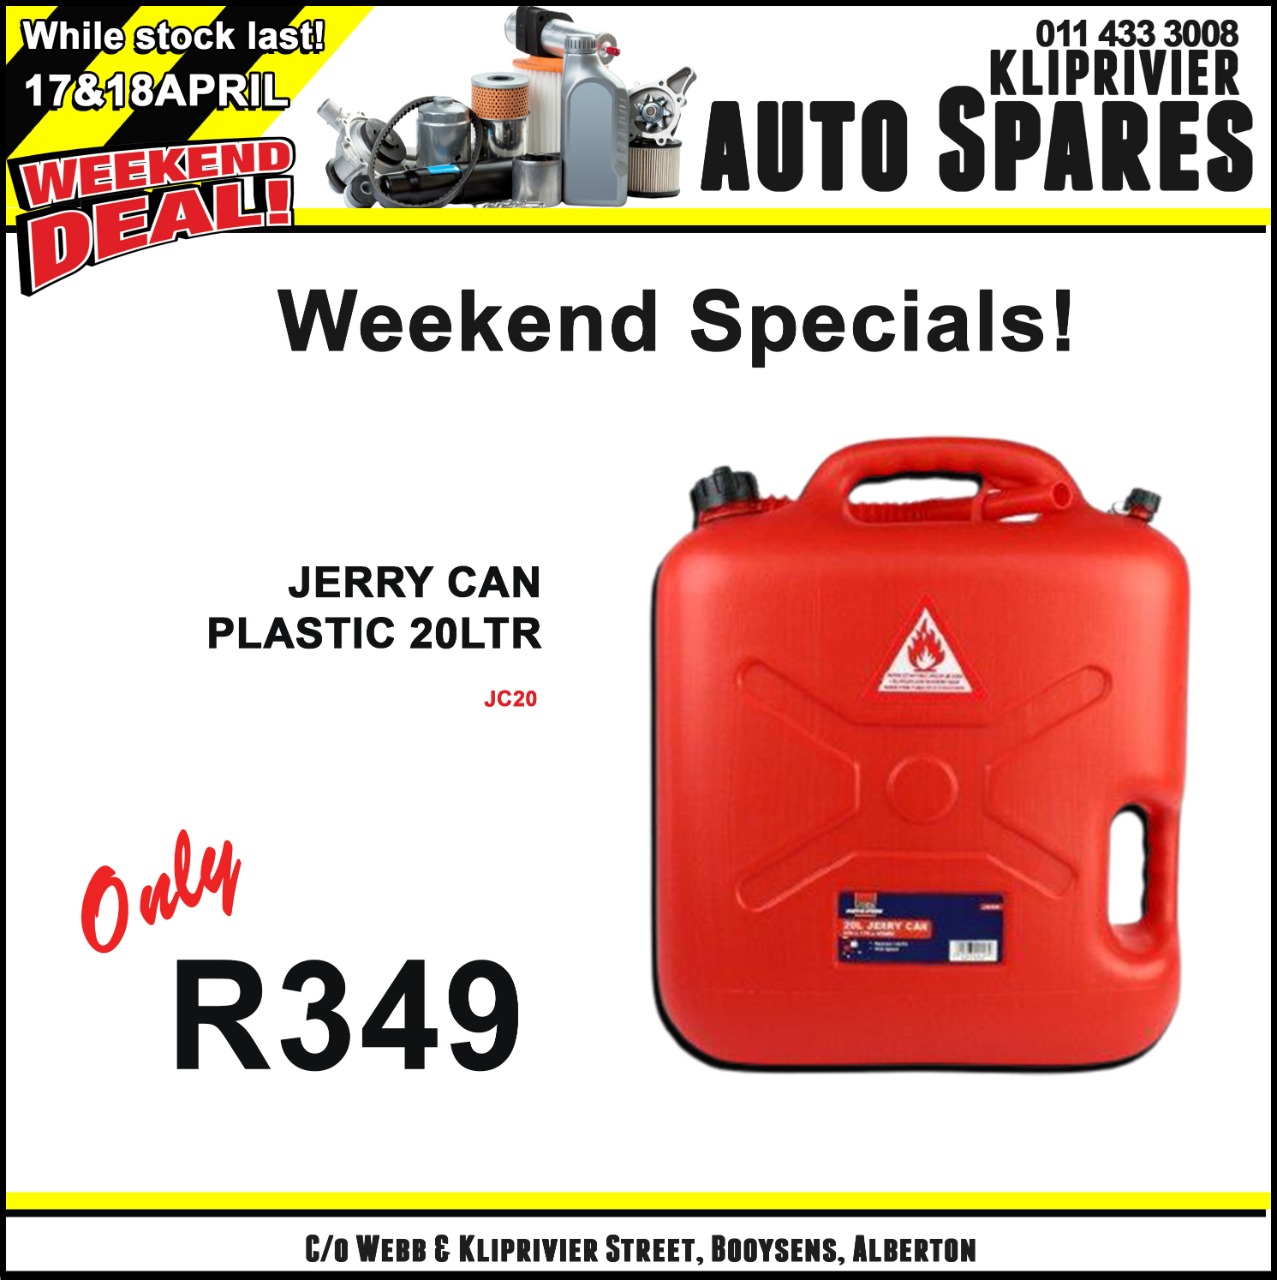 Jerry Can Plastic 20 Liter ONLY at Kliprivier AUTO Spares!